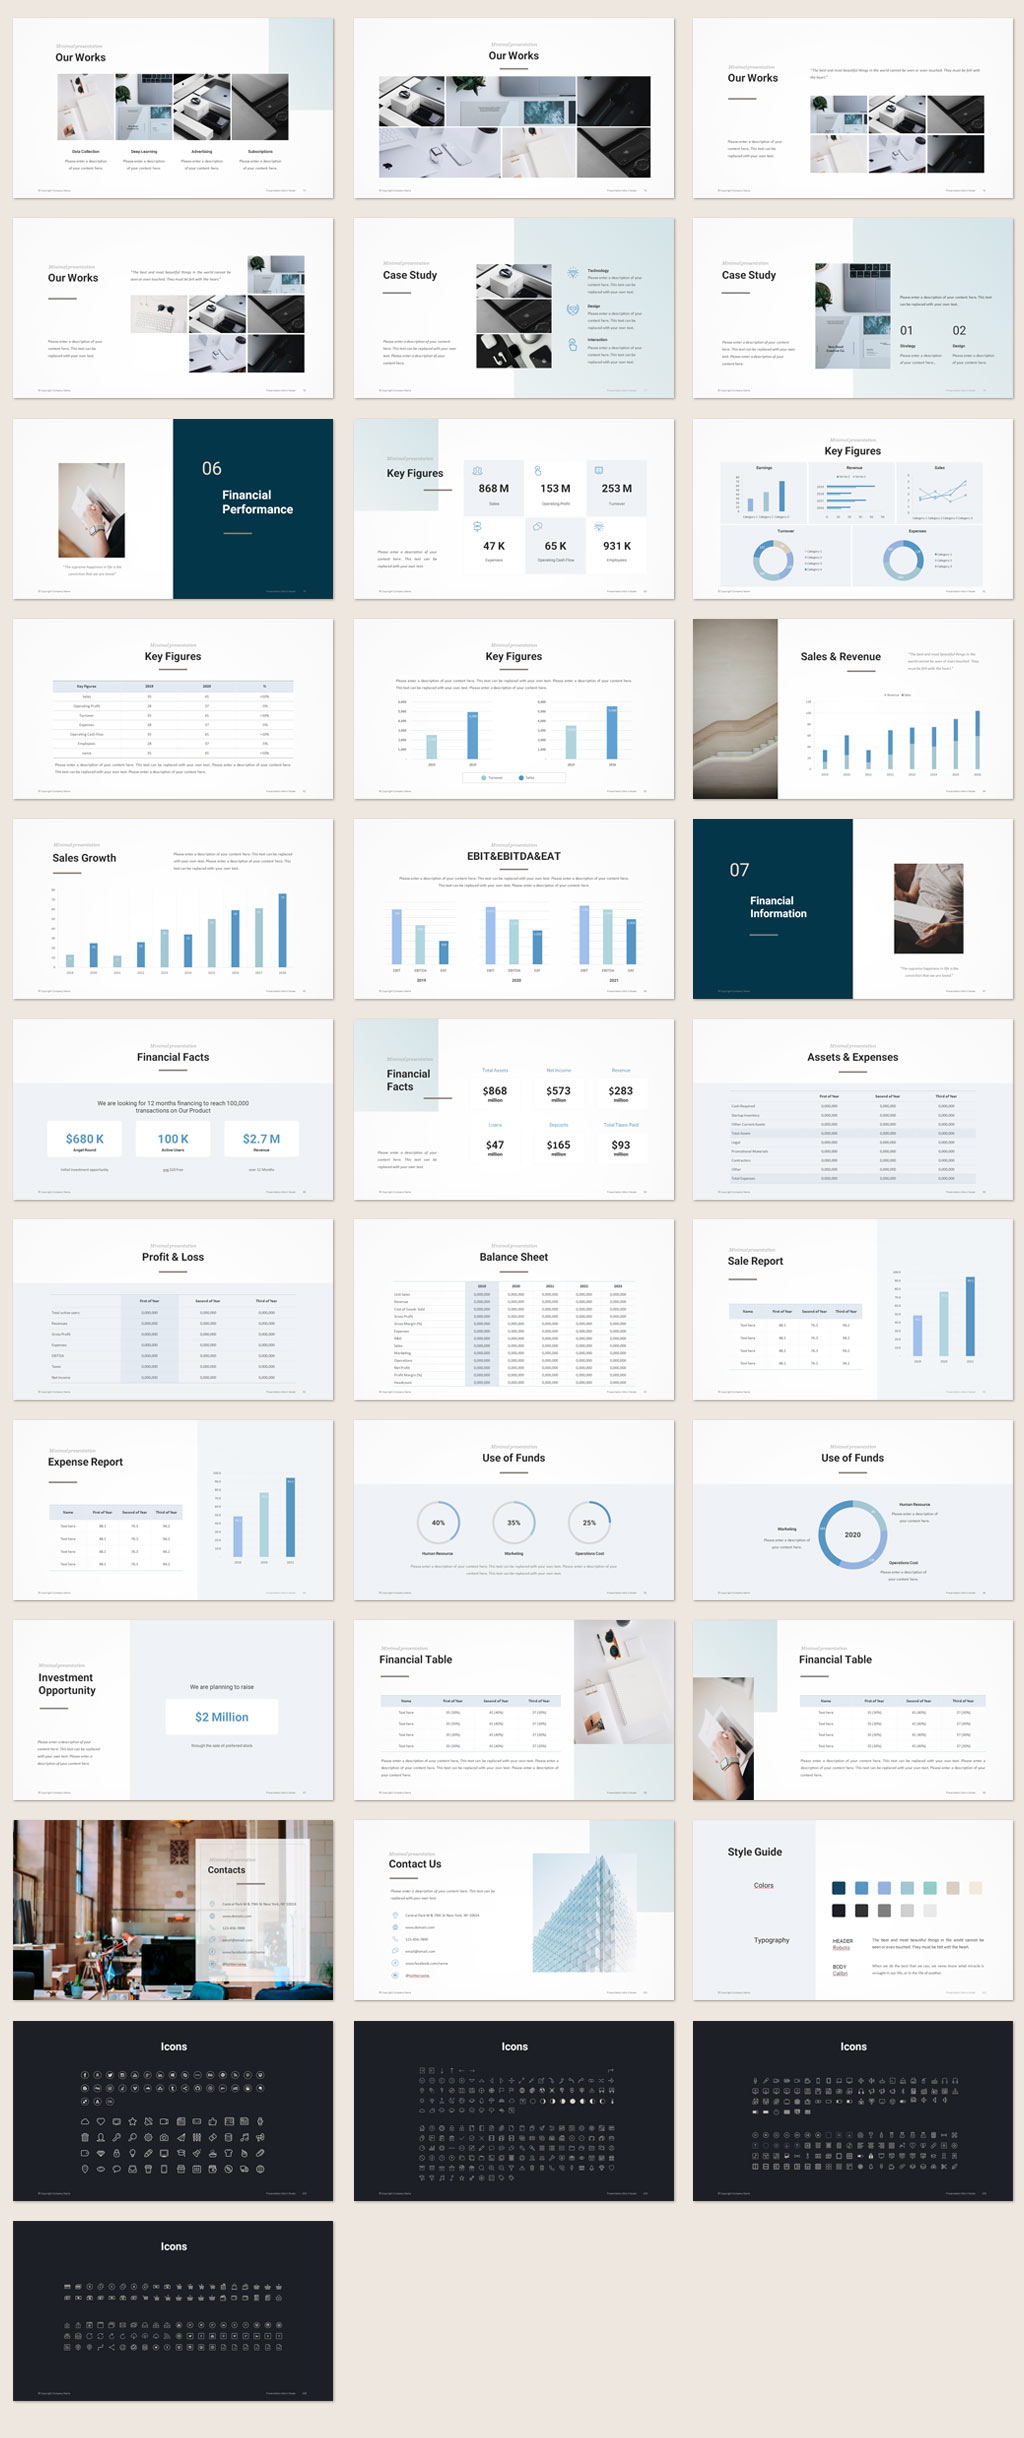 Company Profile PowerPoint Template 